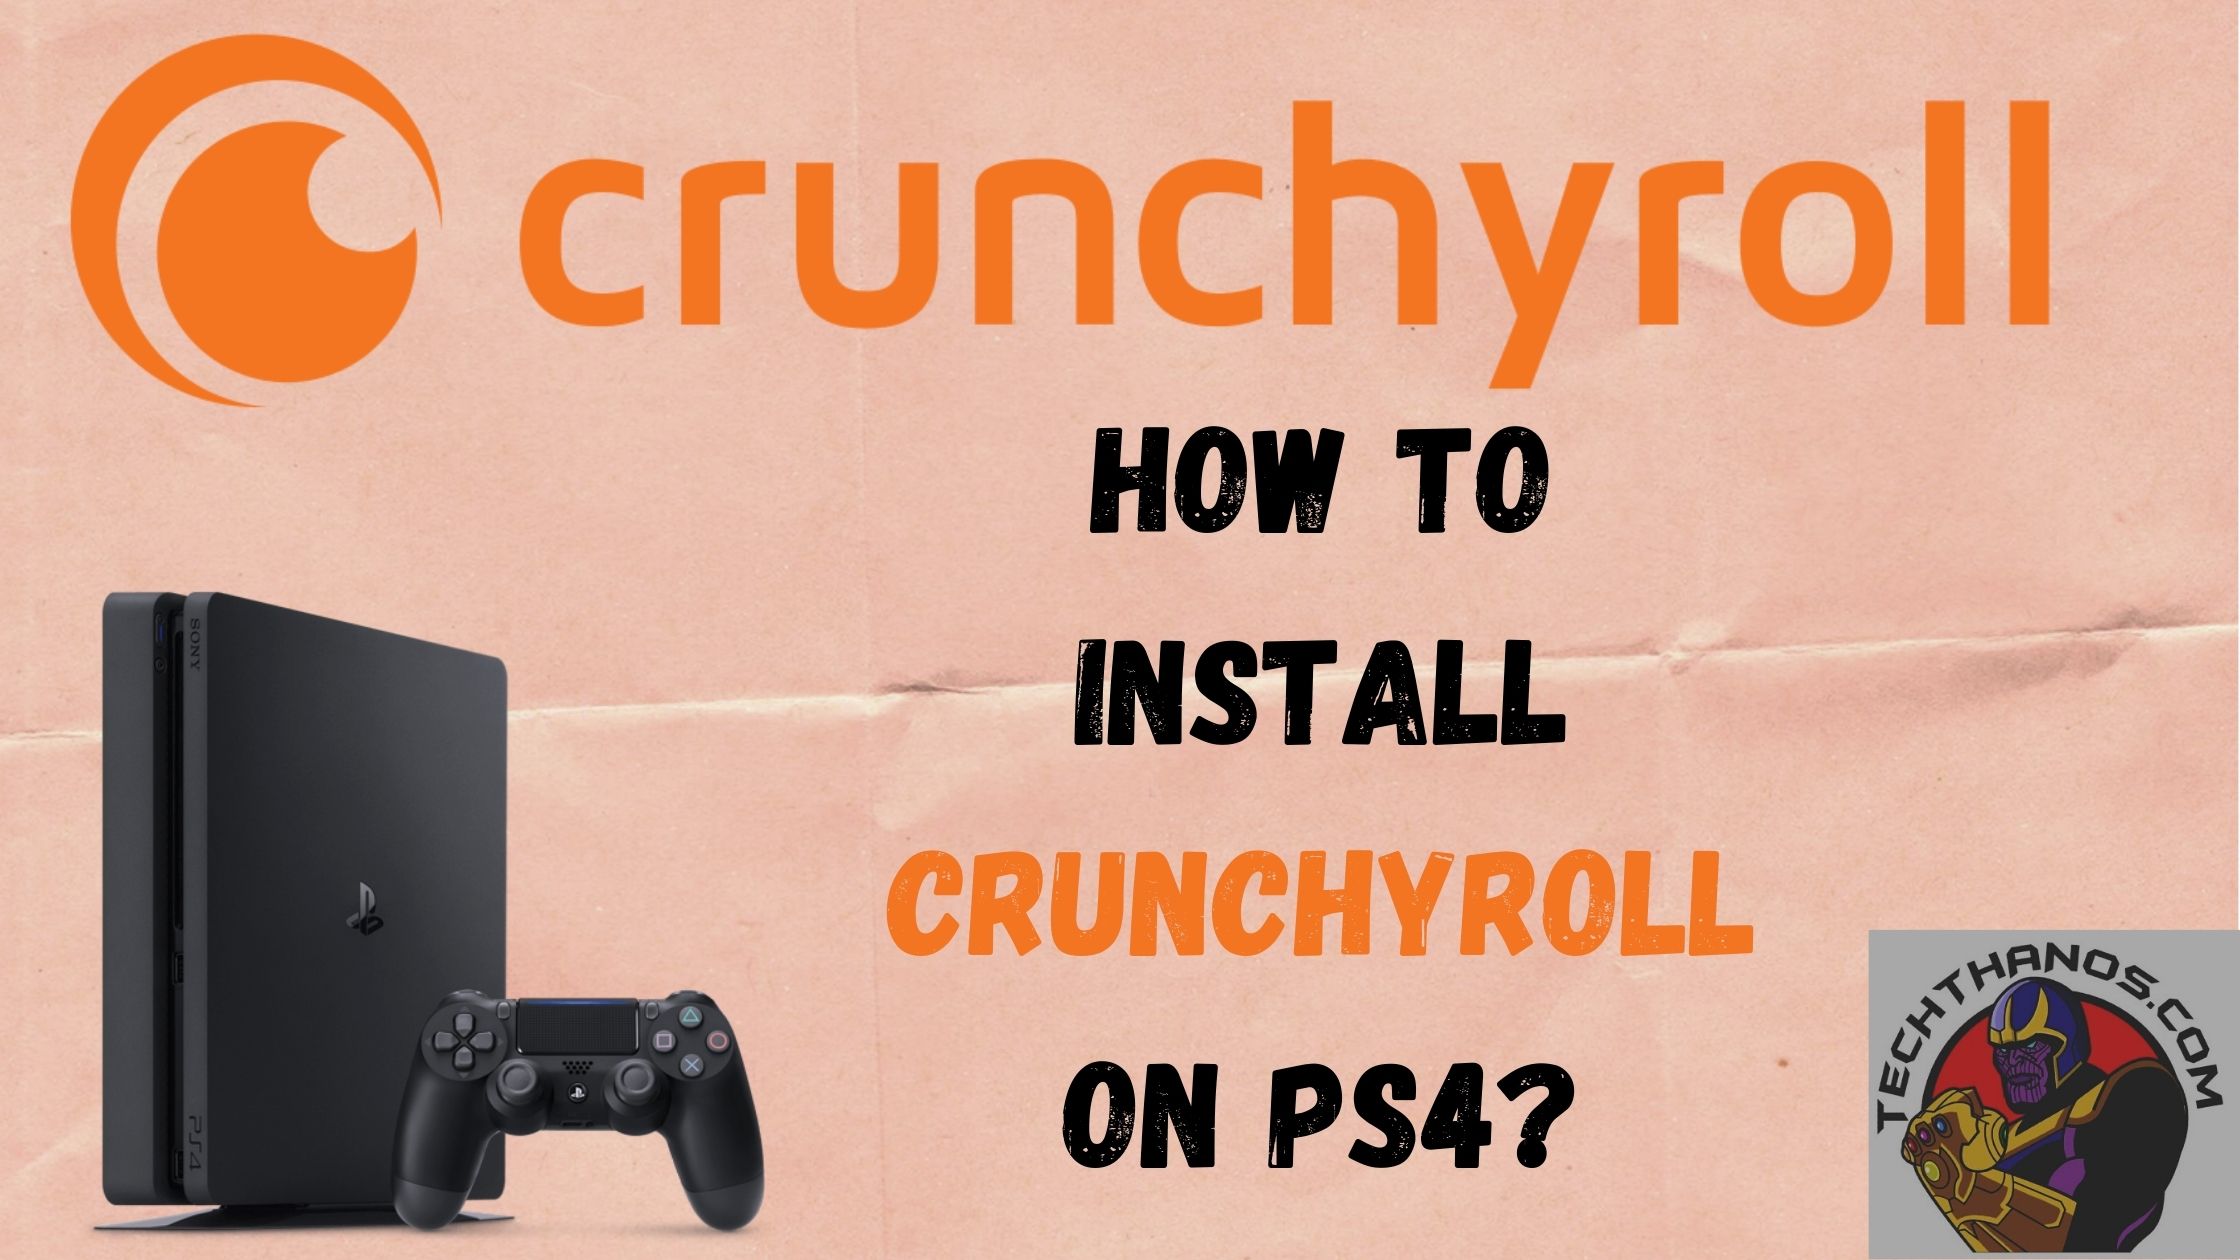 How to Install Crunchyroll on PS4?